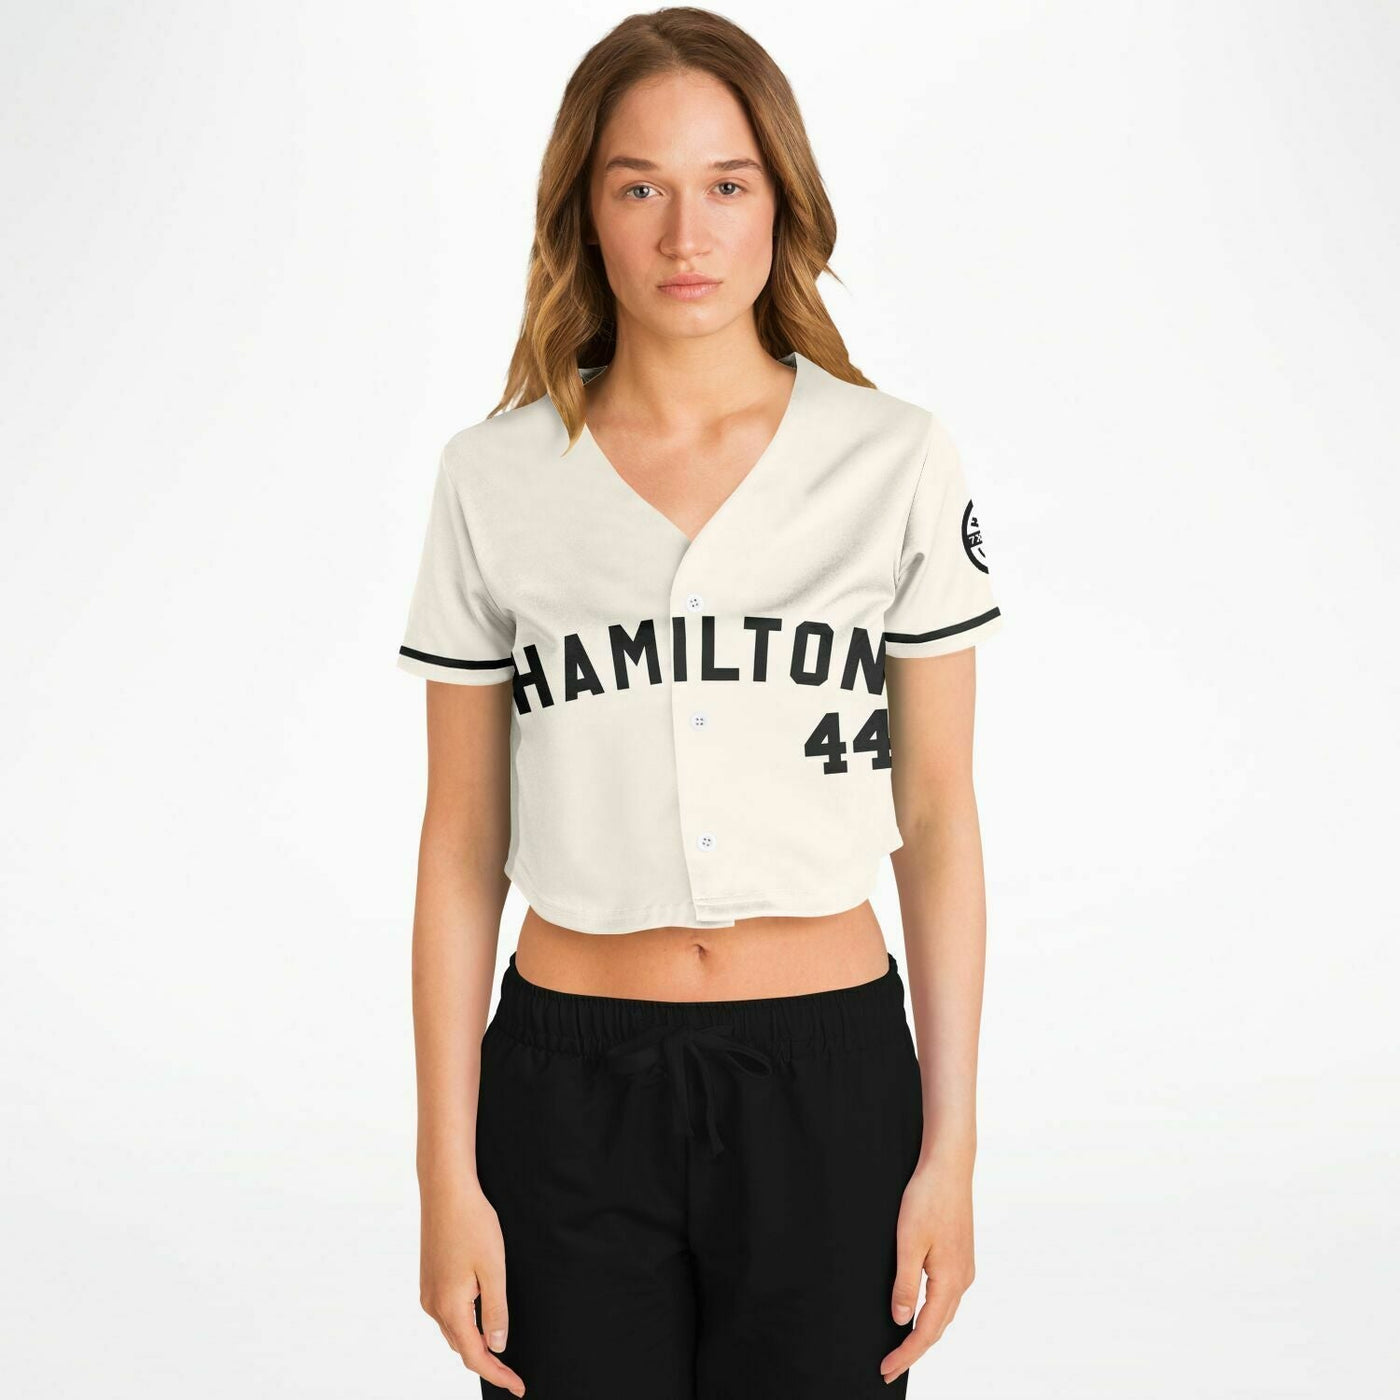 Hamilton -Off-White Champion Crop Top Jersey (Clearance) - Furious Motorsport